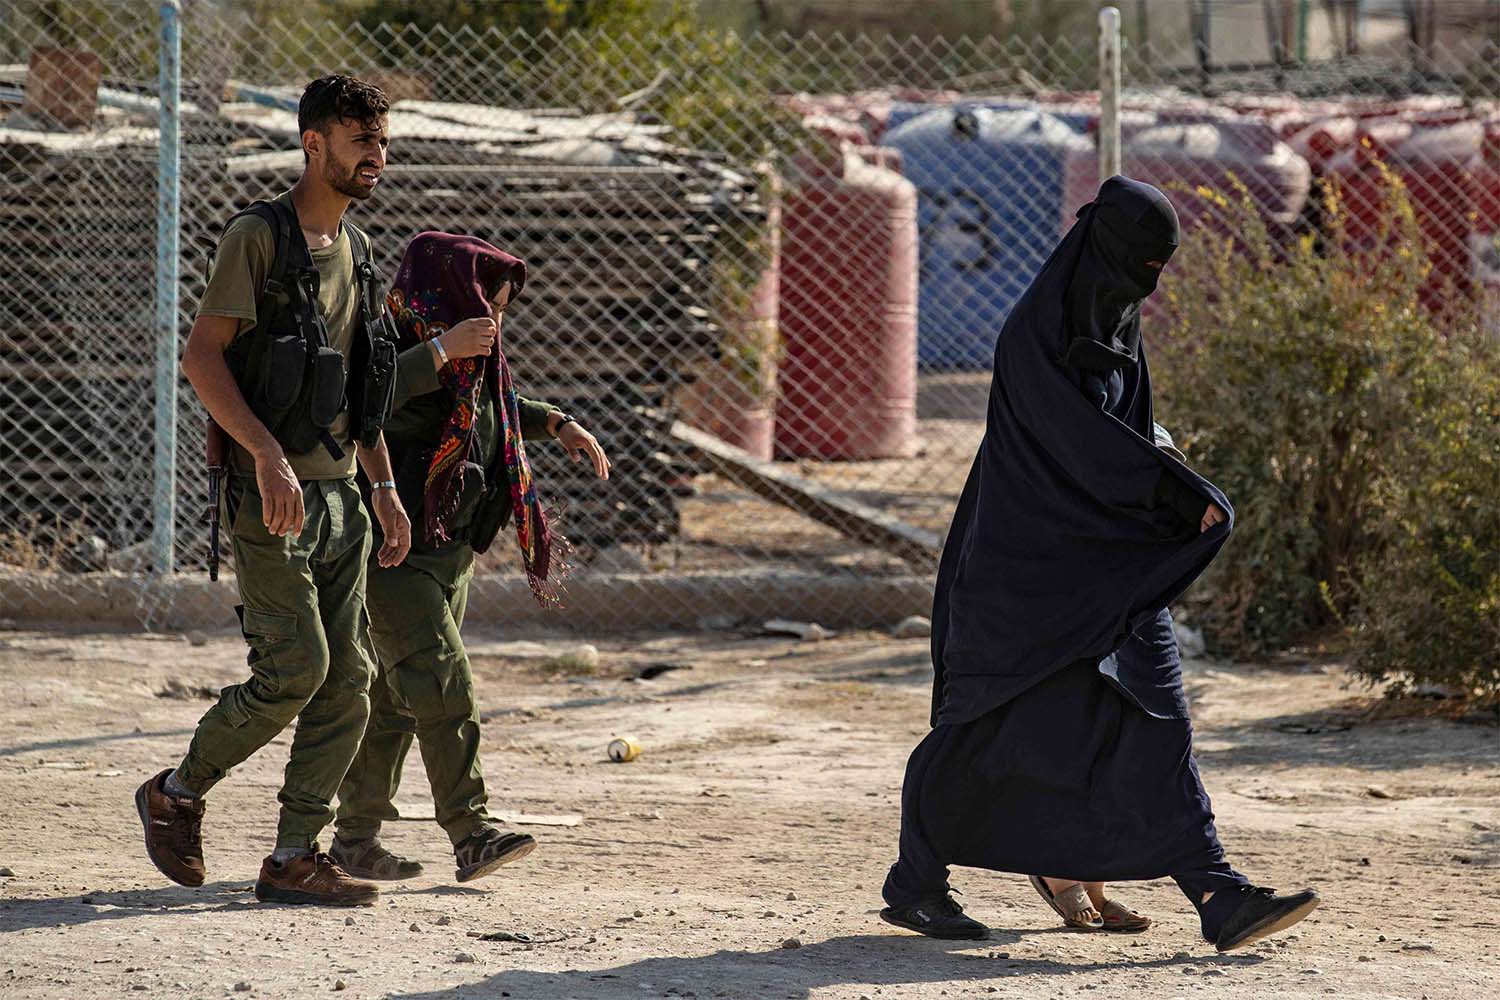 Guards accompanying women at the Kurdish-run al-Hol camp for the displaced where families of Islamic State (IS) foreign fighters are held, in the al-Hasakeh governorate in northeastern Syria